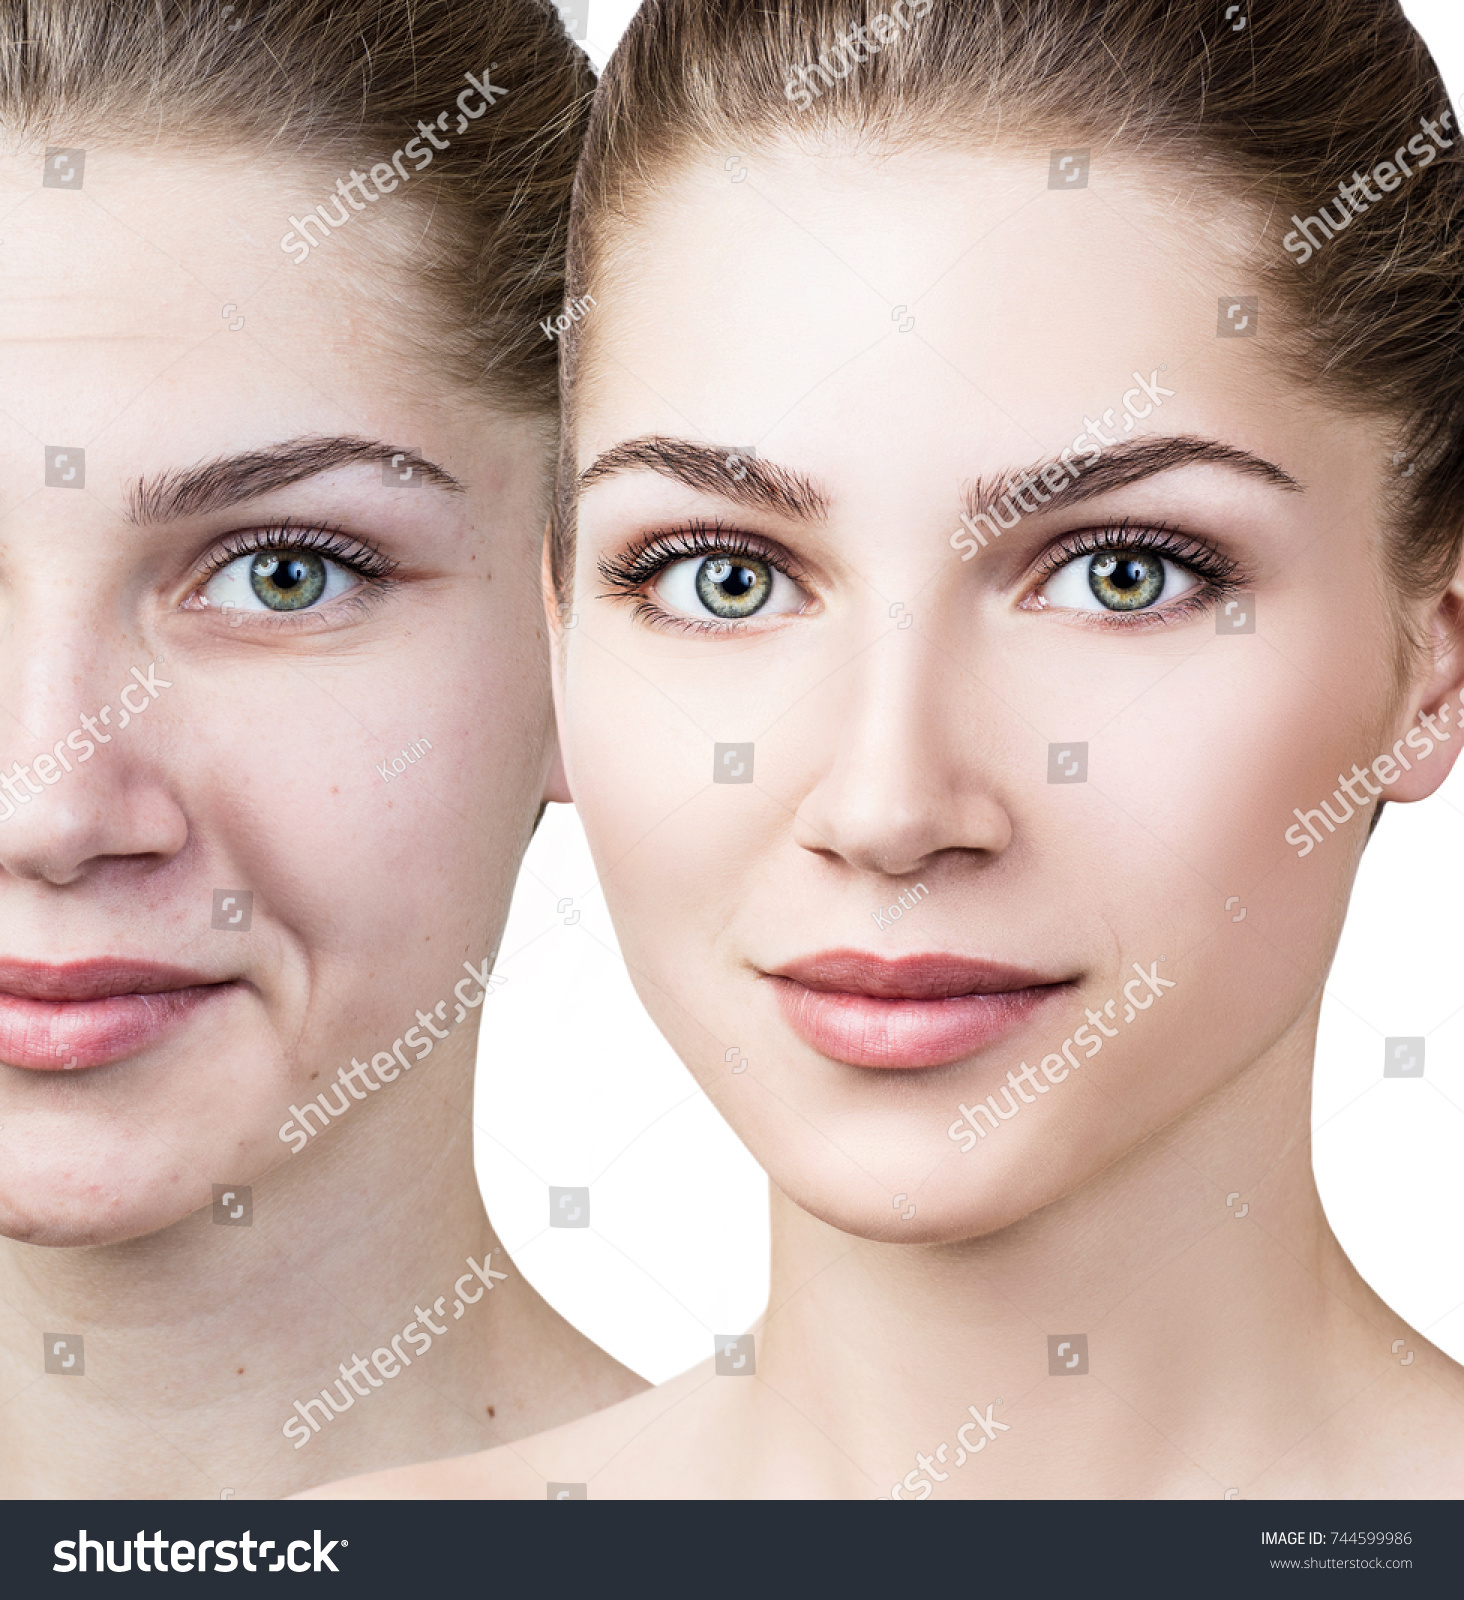 Woman's face before and after rejuvenation. #744599986